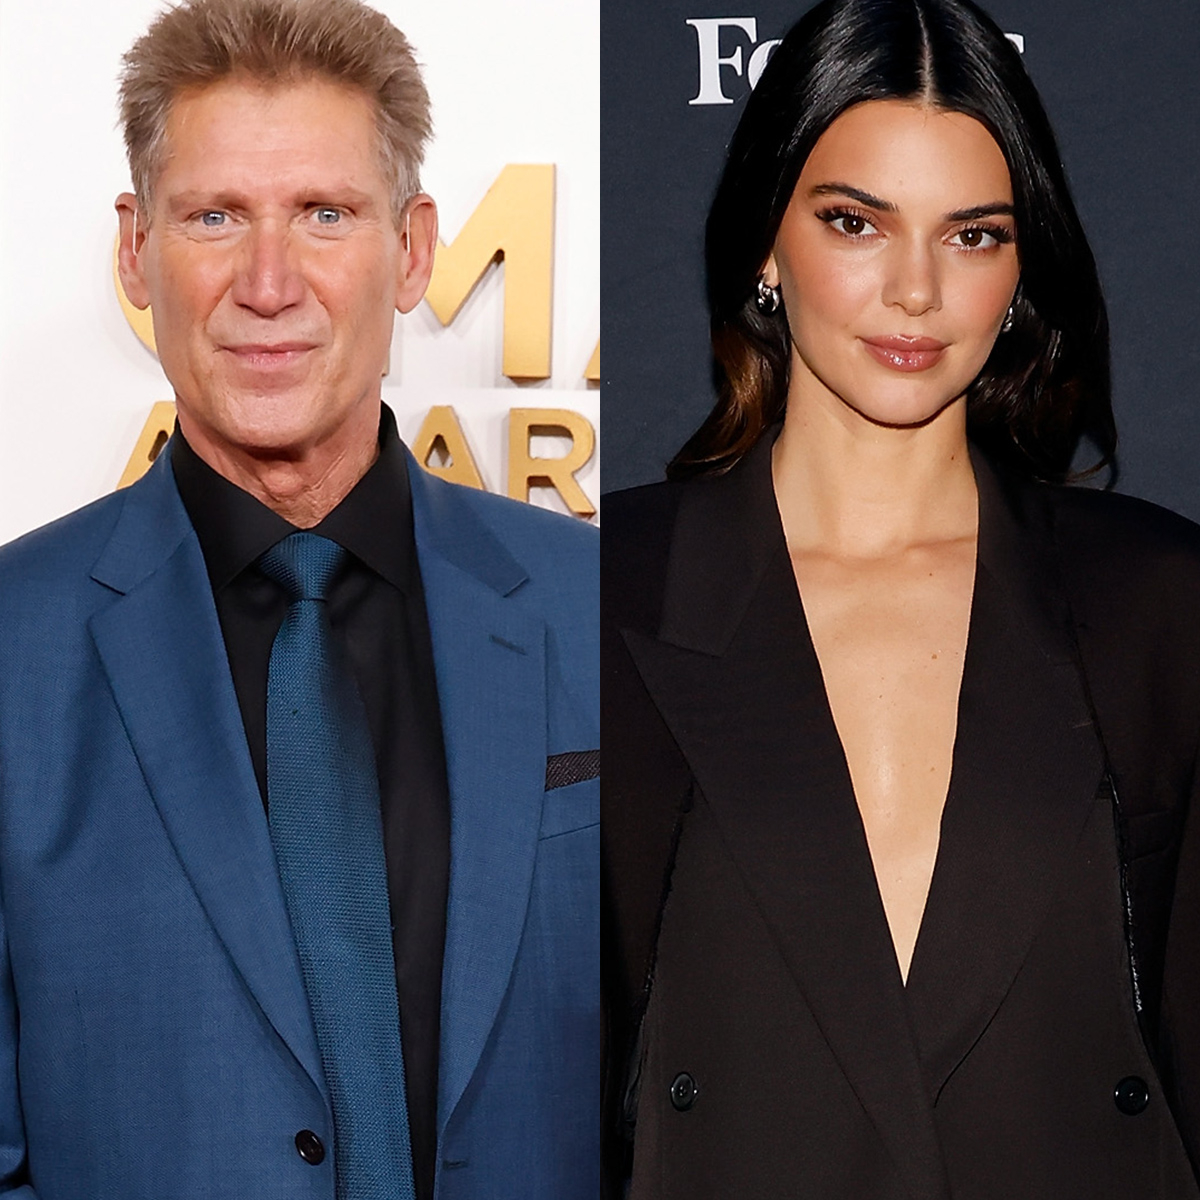 Gerry Turner Confirms What Kendall Jenner Saw on His Phone